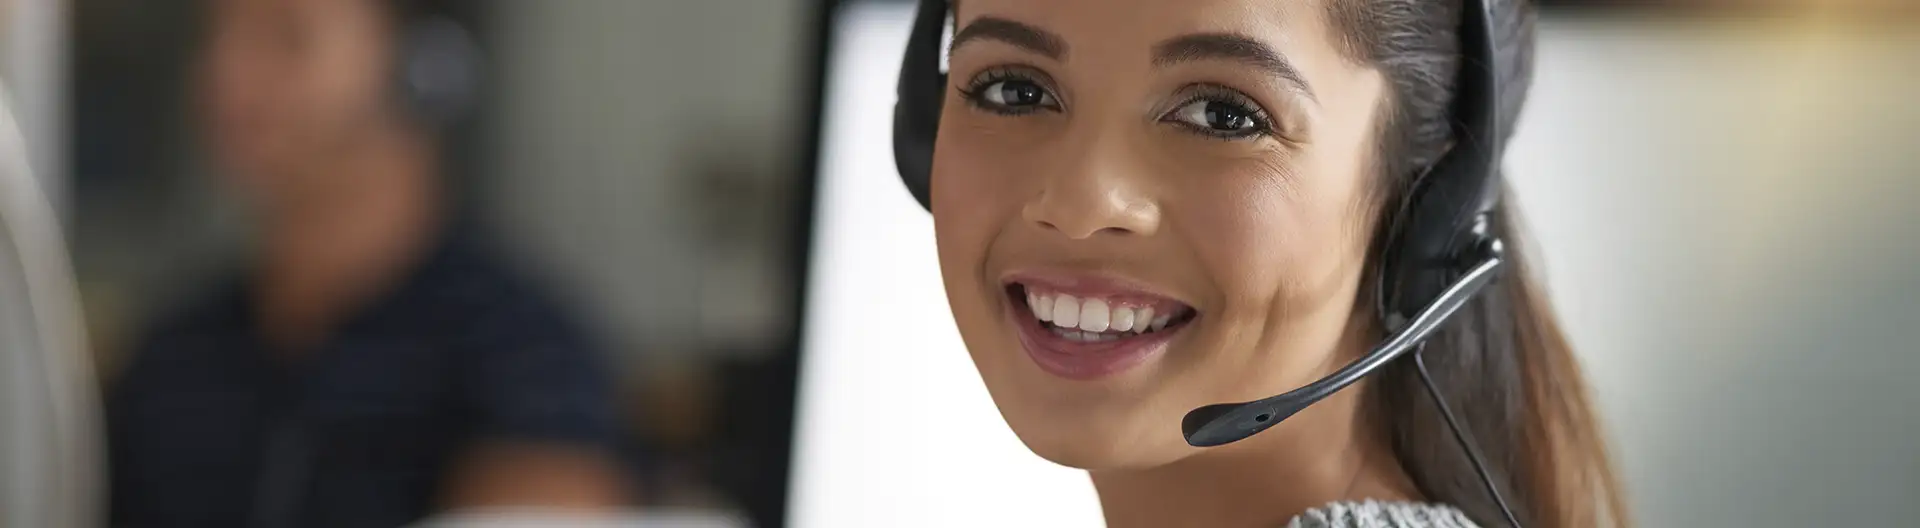 Service Desk Outsourcing: 7 Ways Telcos Can Improve Support Efficiency - Banner